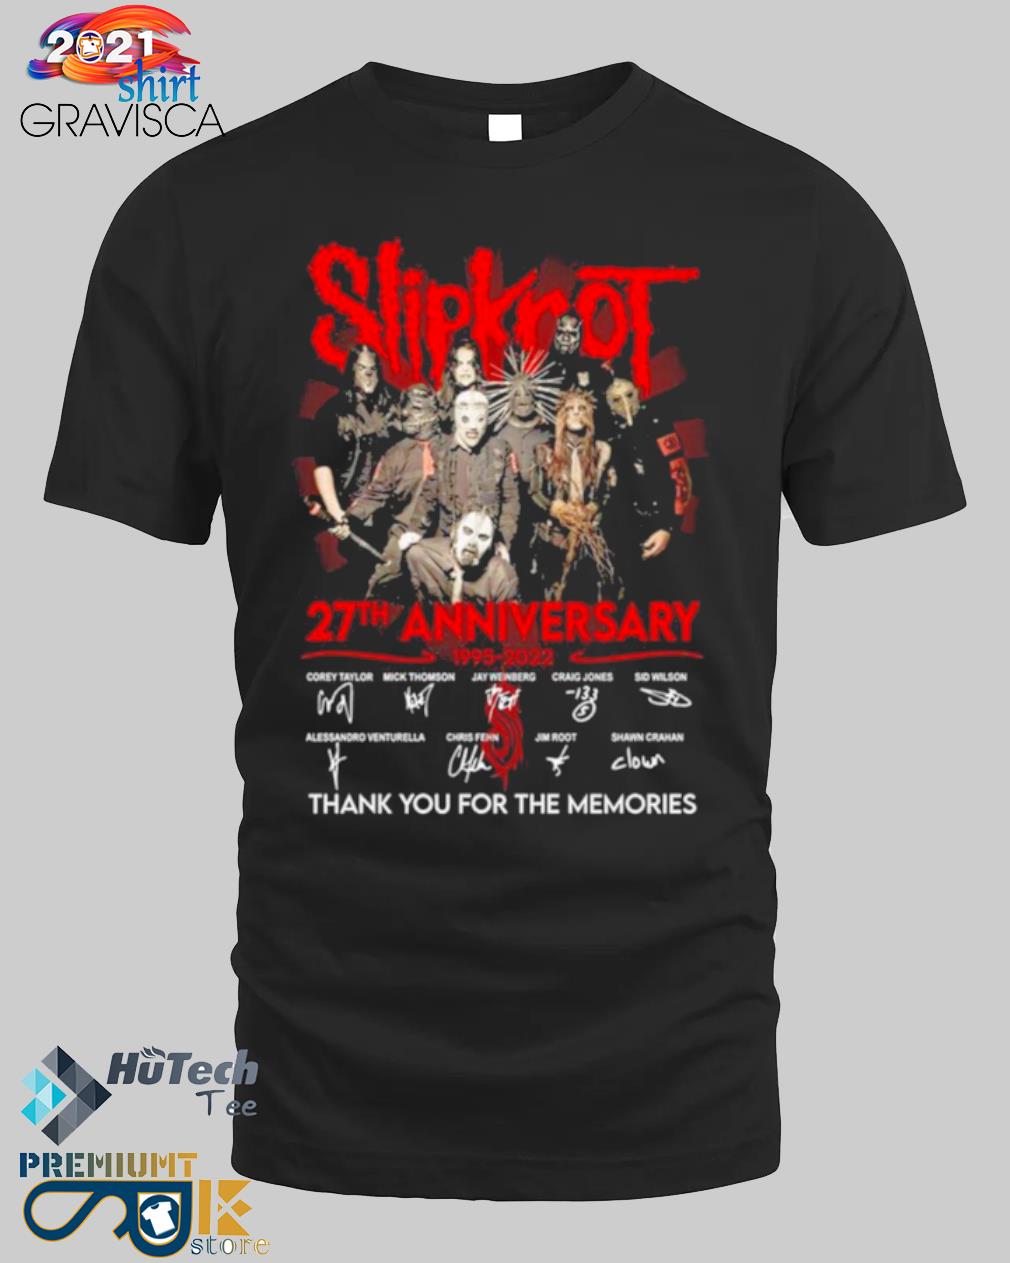 1995 2022 27th anniversary slipknot thank you for the memories signatures shirt